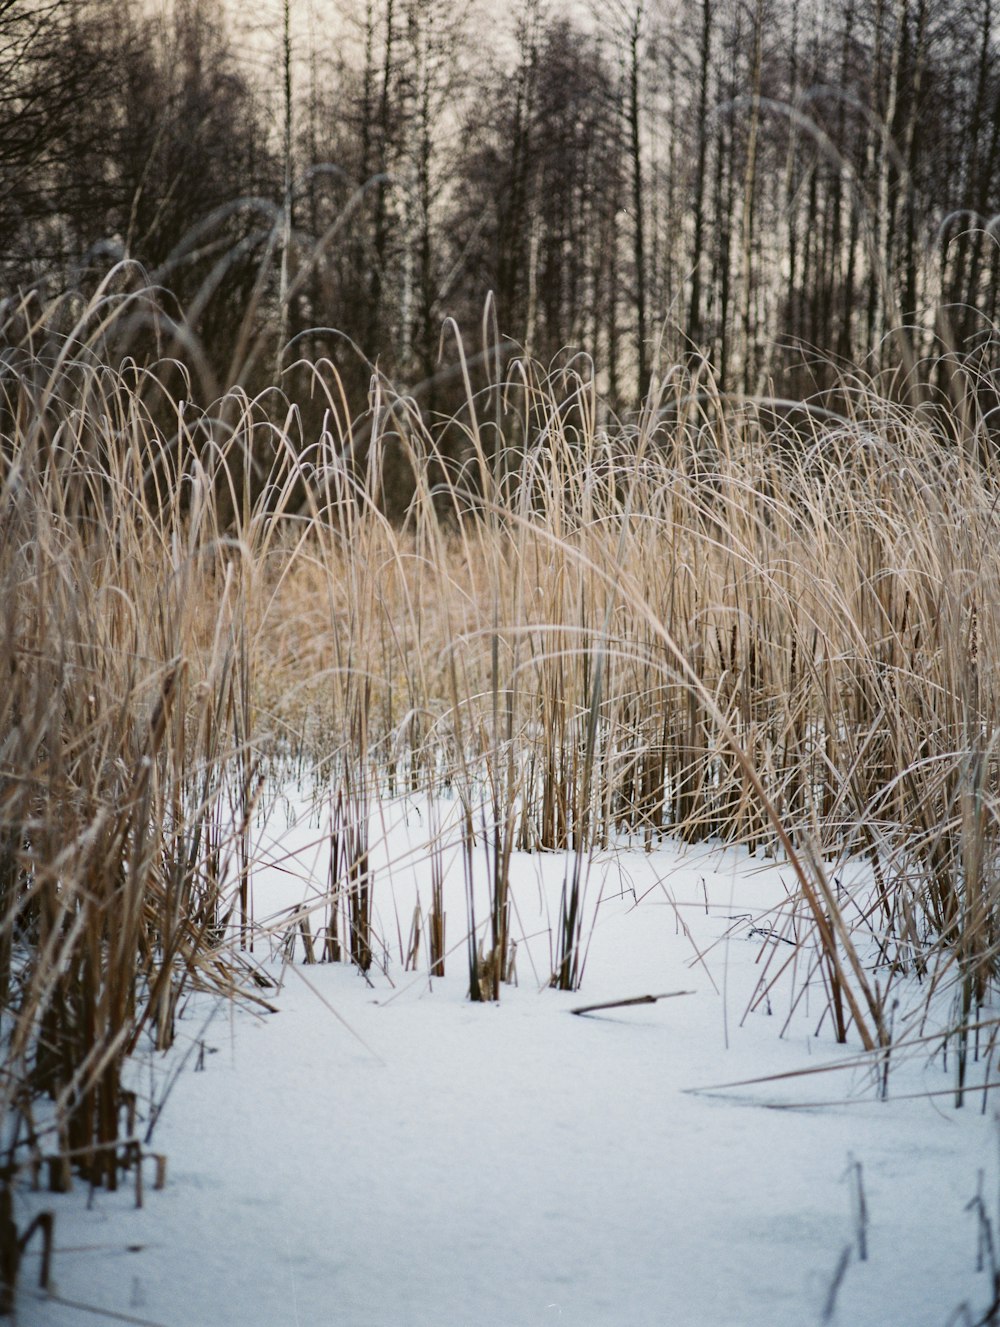 a snowy field with tall grass and trees in the background